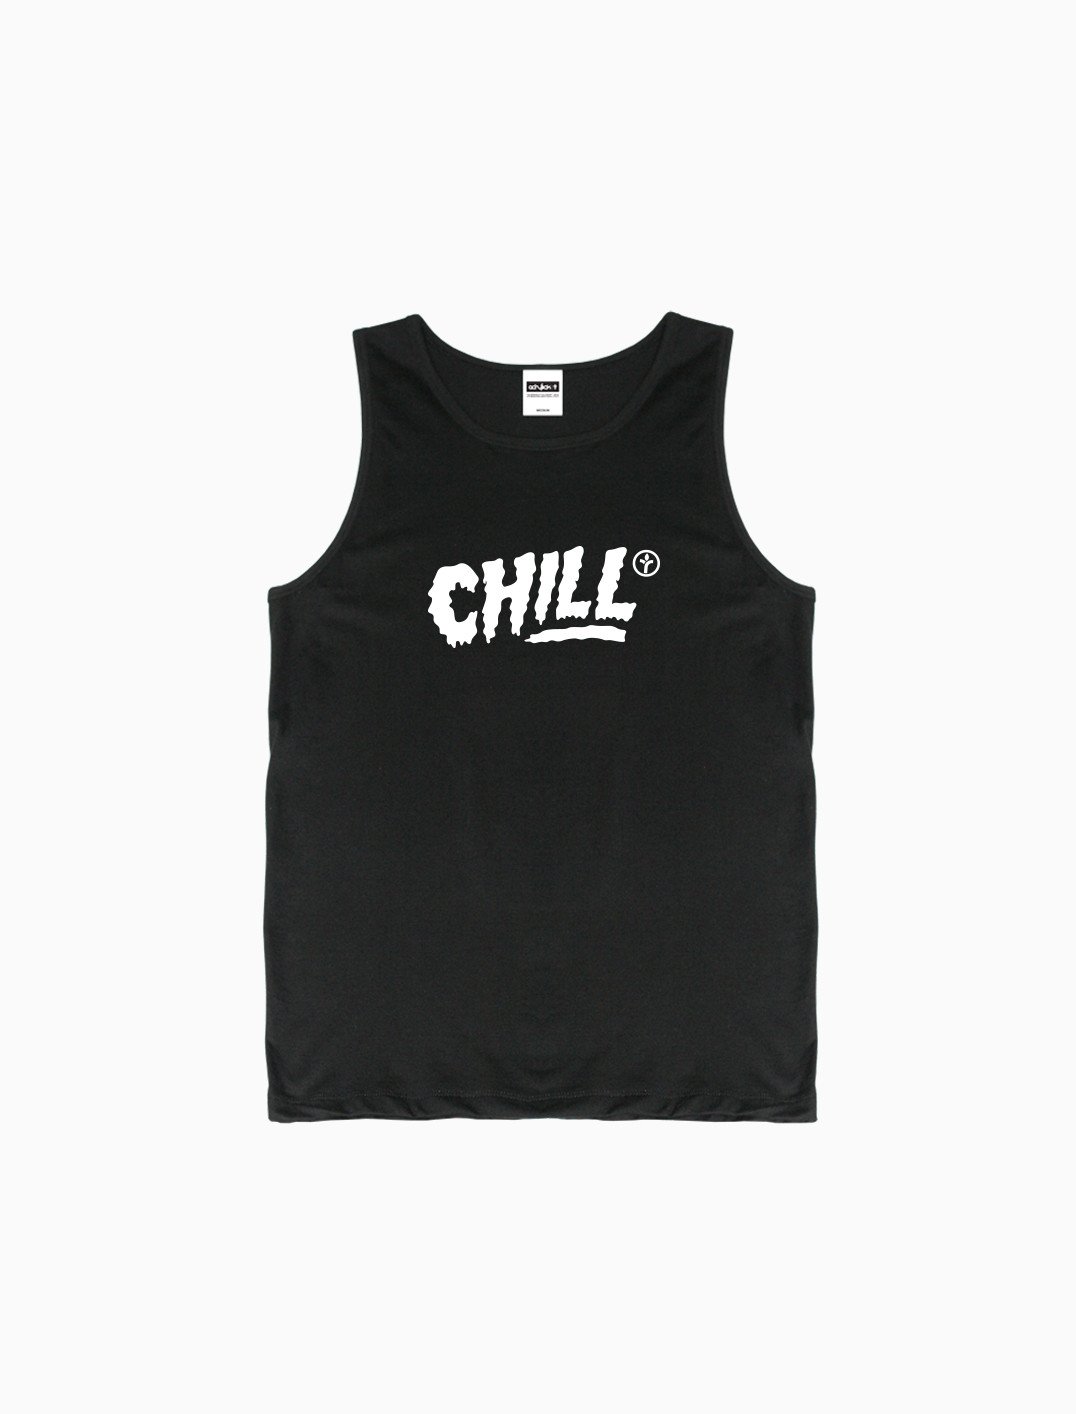 Acrylick - Chill Tank Top - Mens (9696517513)